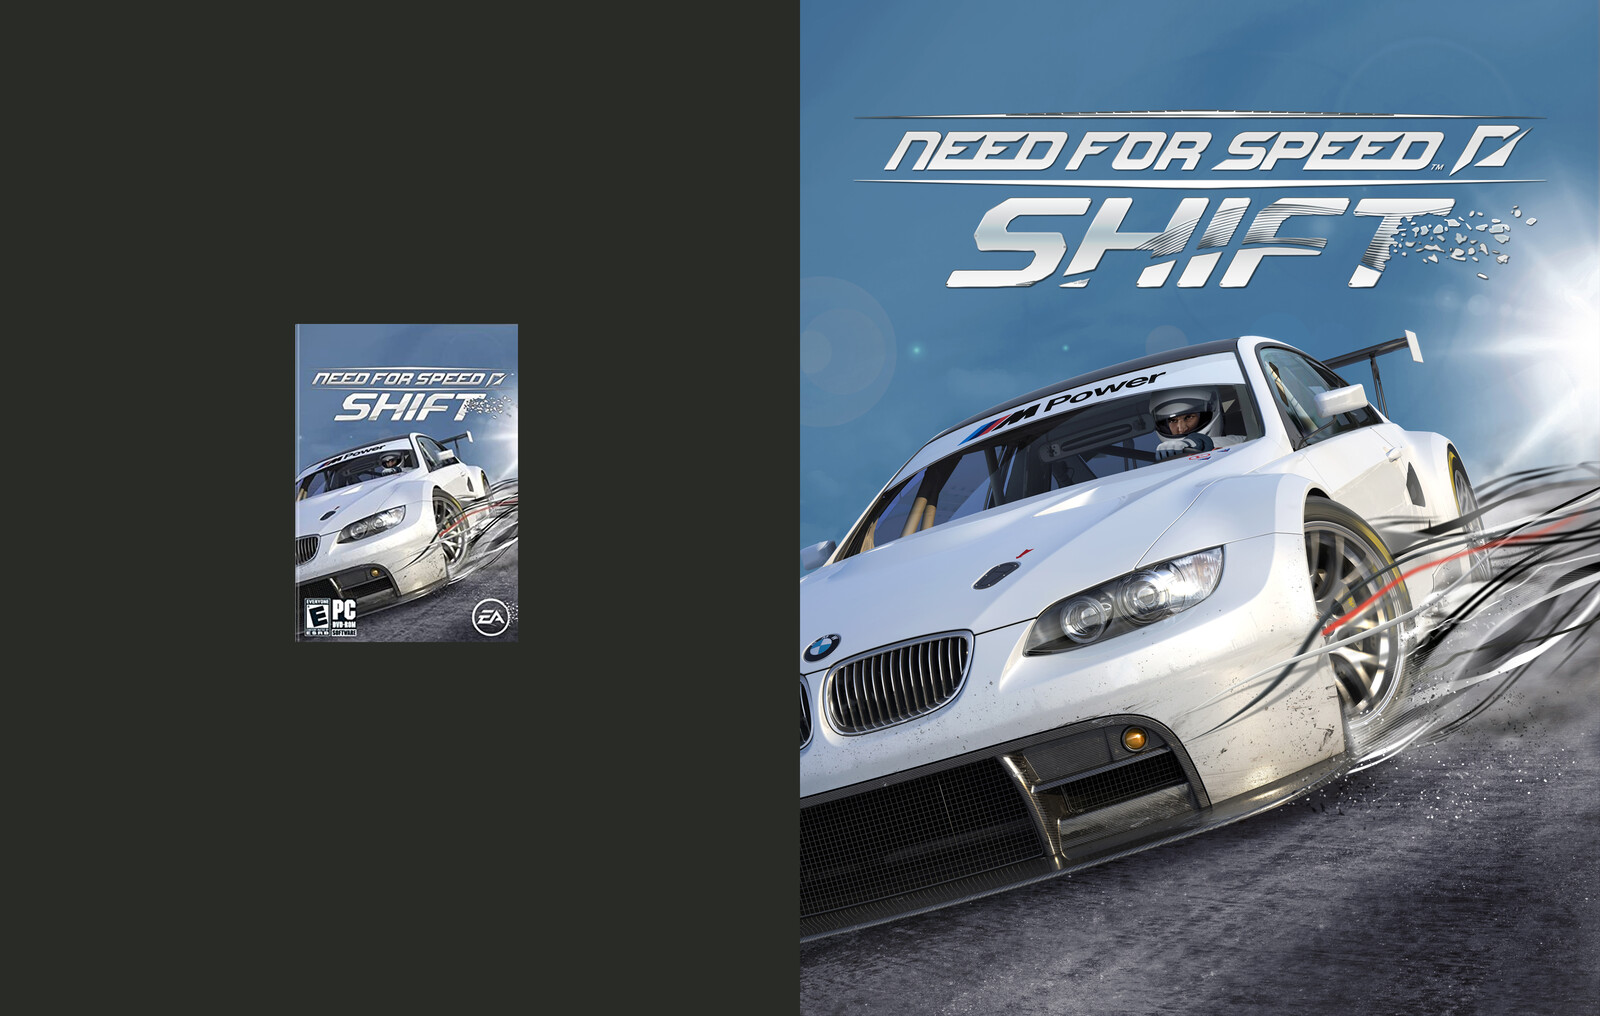 Need for Speed: Shift (Original Scan vs. Poster format)